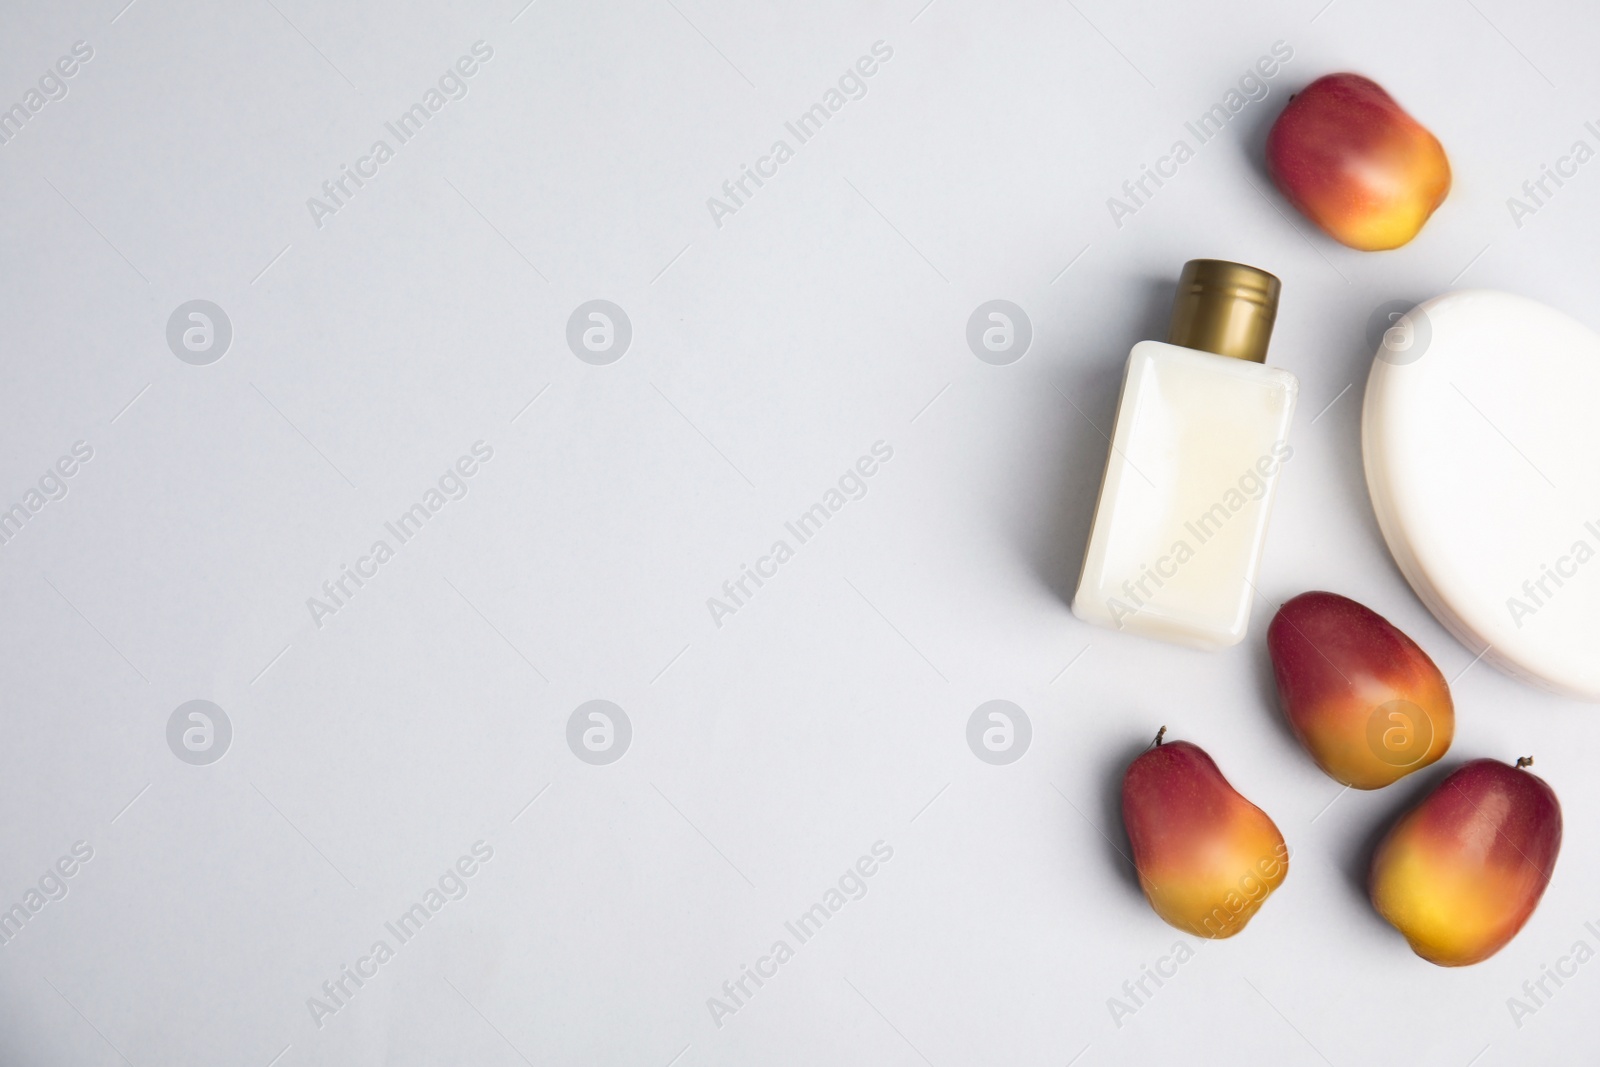 Image of Fresh ripe palm oil fruits and cosmetic products on white background, flat lay. Space for text